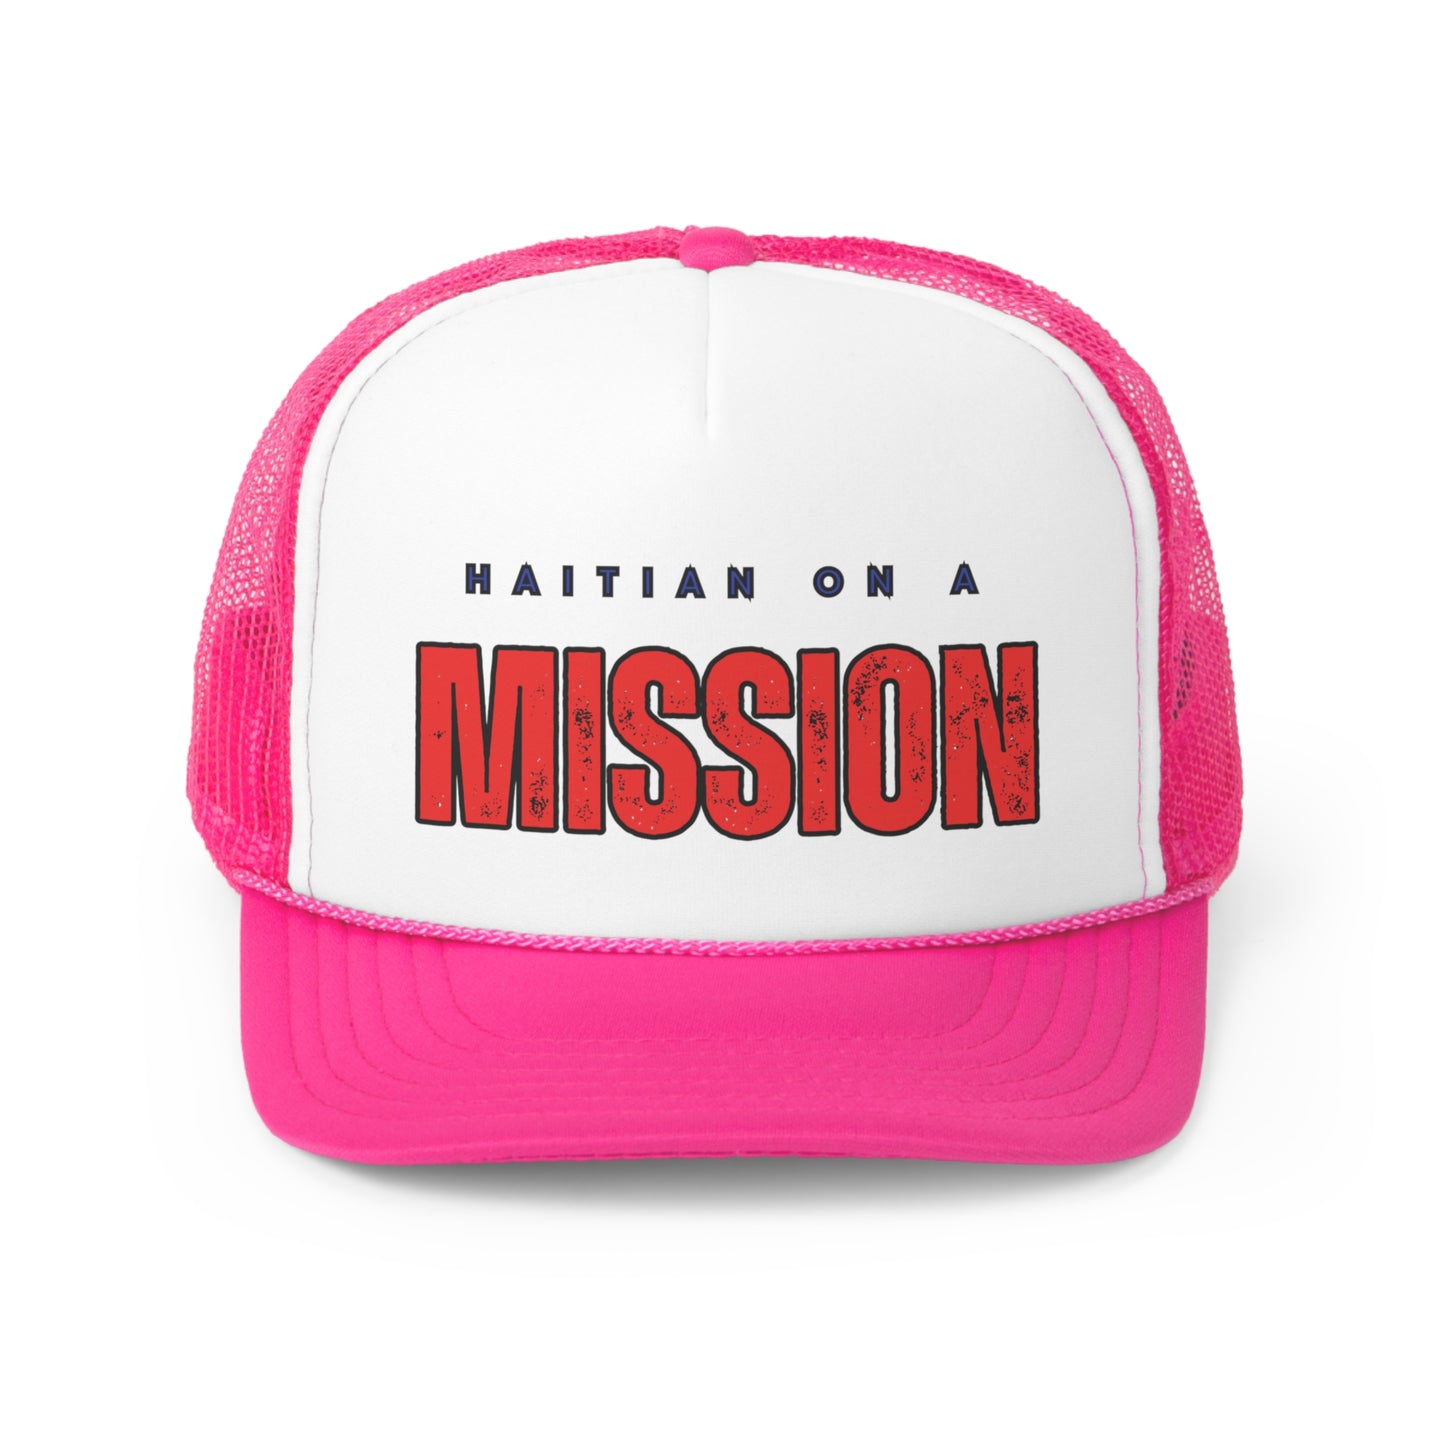 Haitian on a Mission Trucker Caps